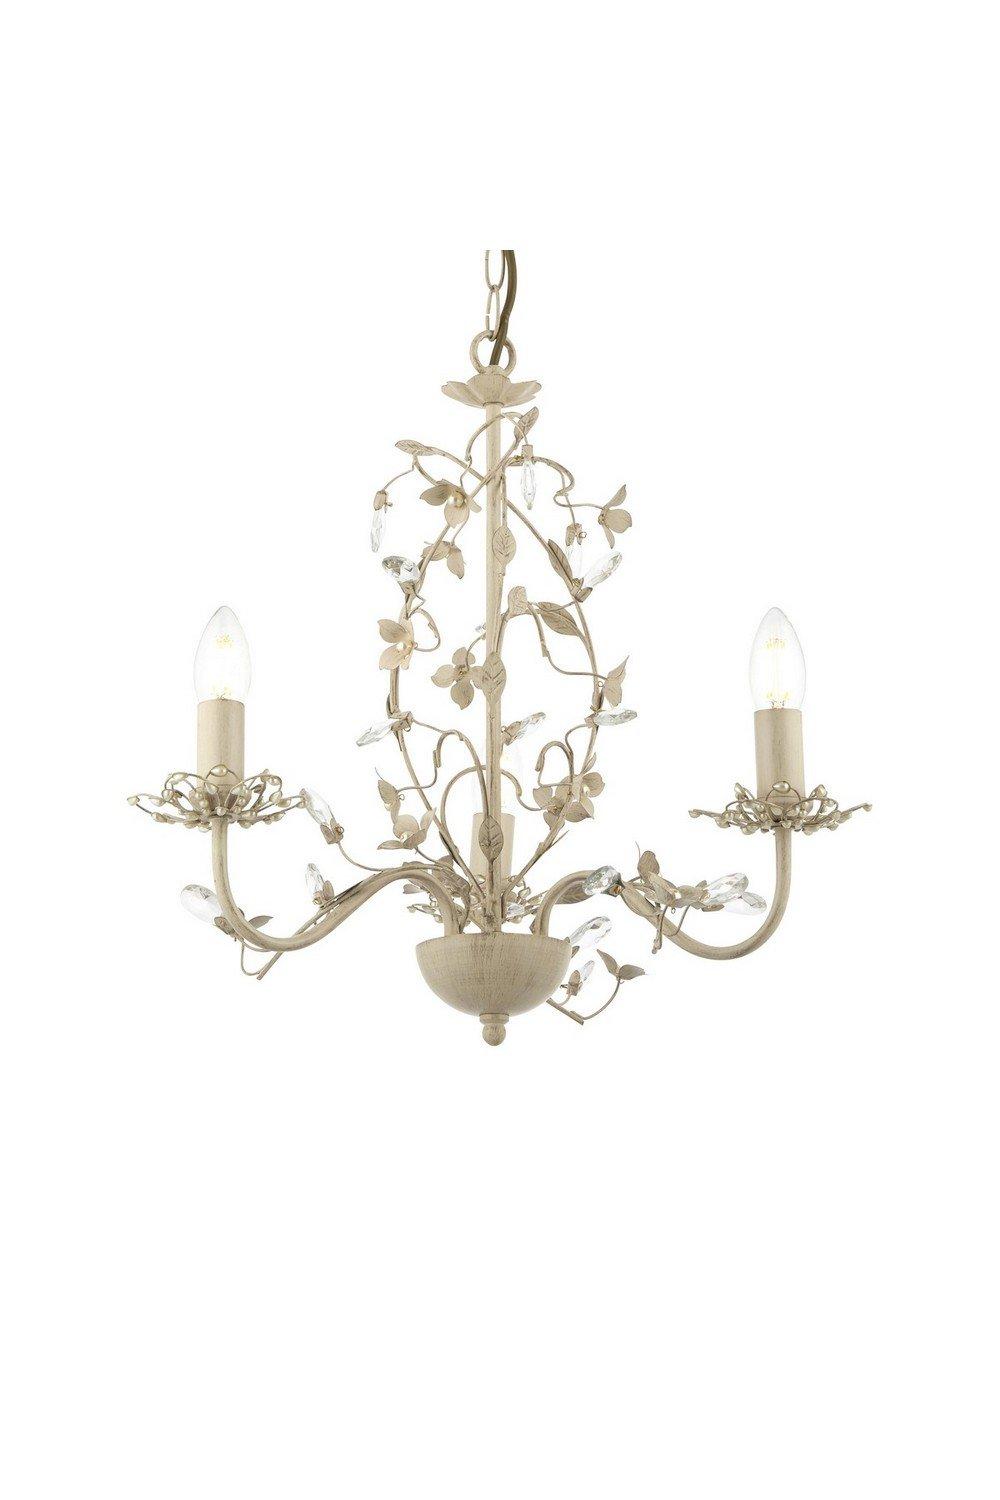 Lullaby 3 Light Multi Arm Ceiling Pendant Flower Design Cream Brushed Gold Pearl Effect Acrylic E14